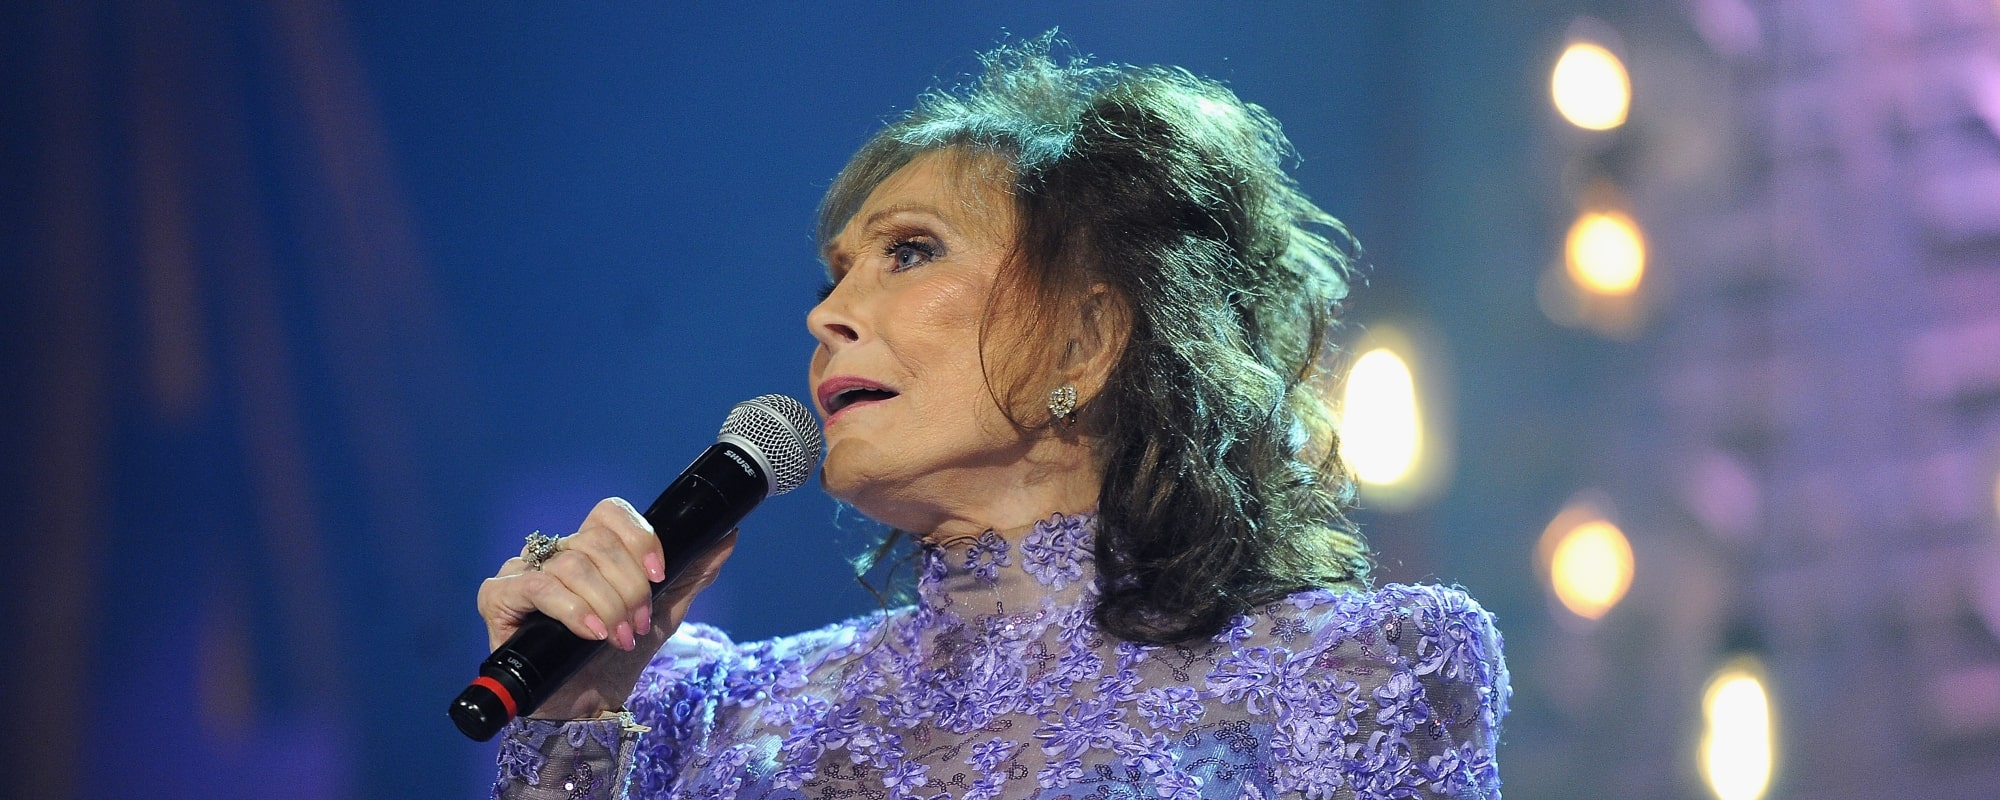 Essential Loretta Lynn: 3 Deep Cuts From The First Lady of Country Music